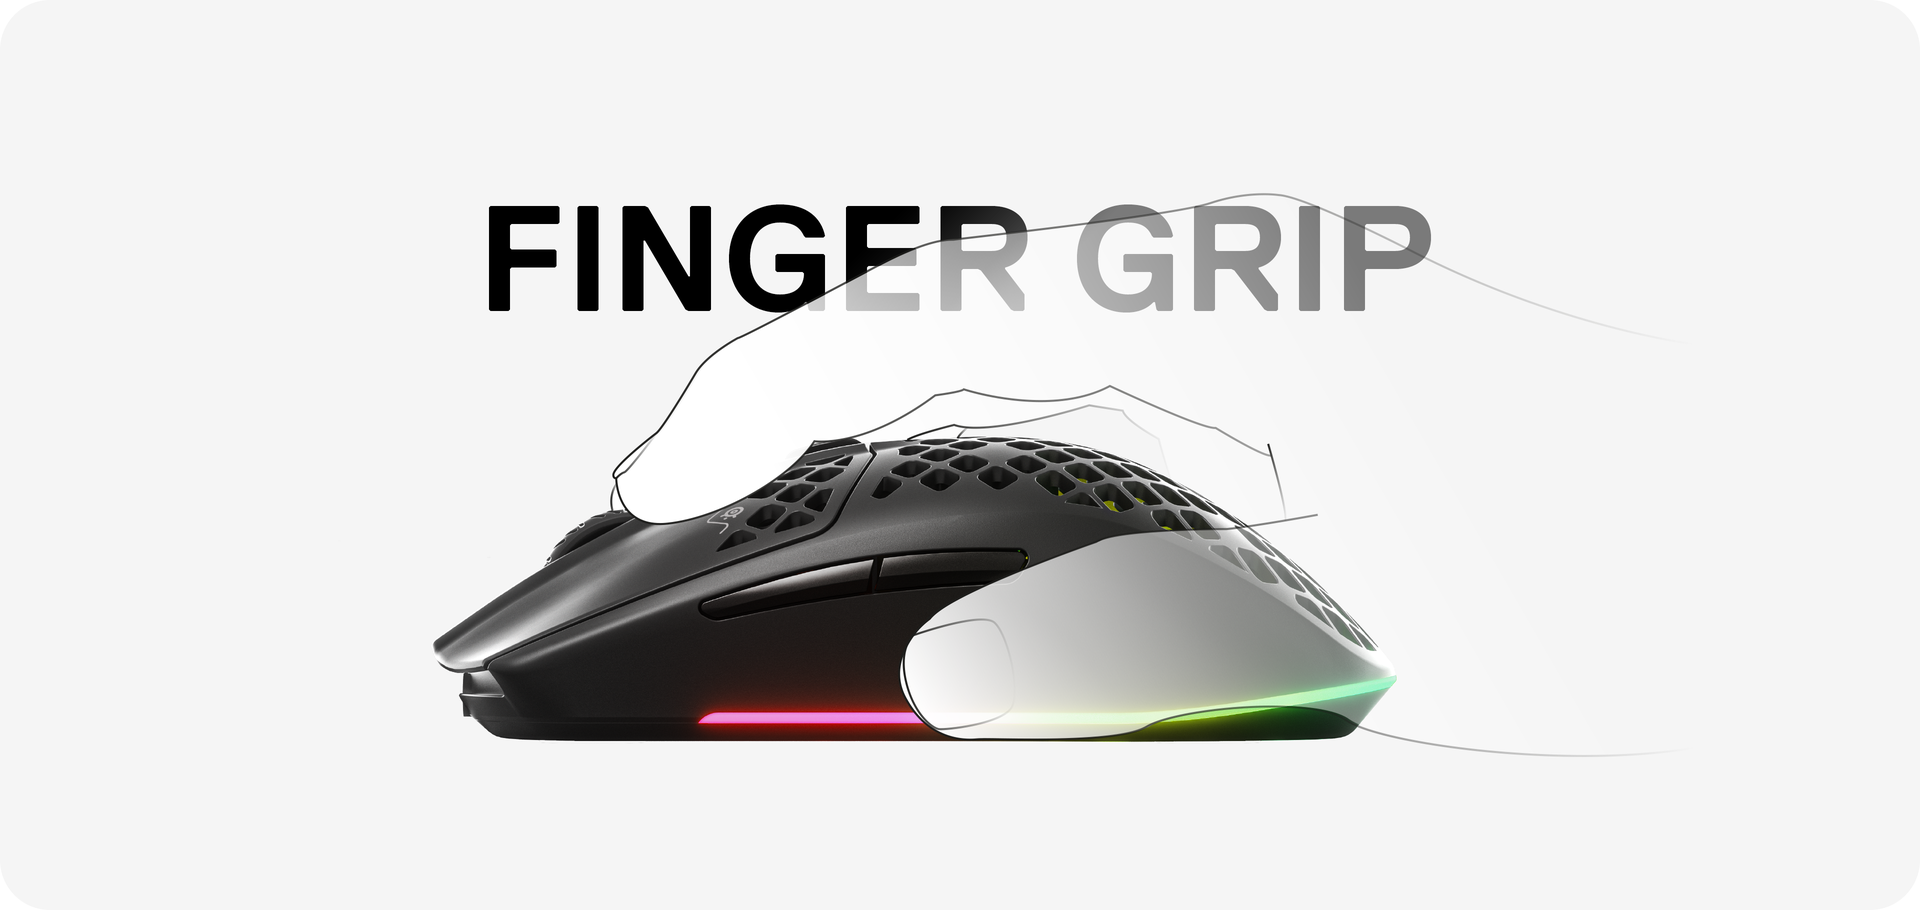 Example of an Aerox 3 Wireless 2022 gaming mouse being used with a finger grip.